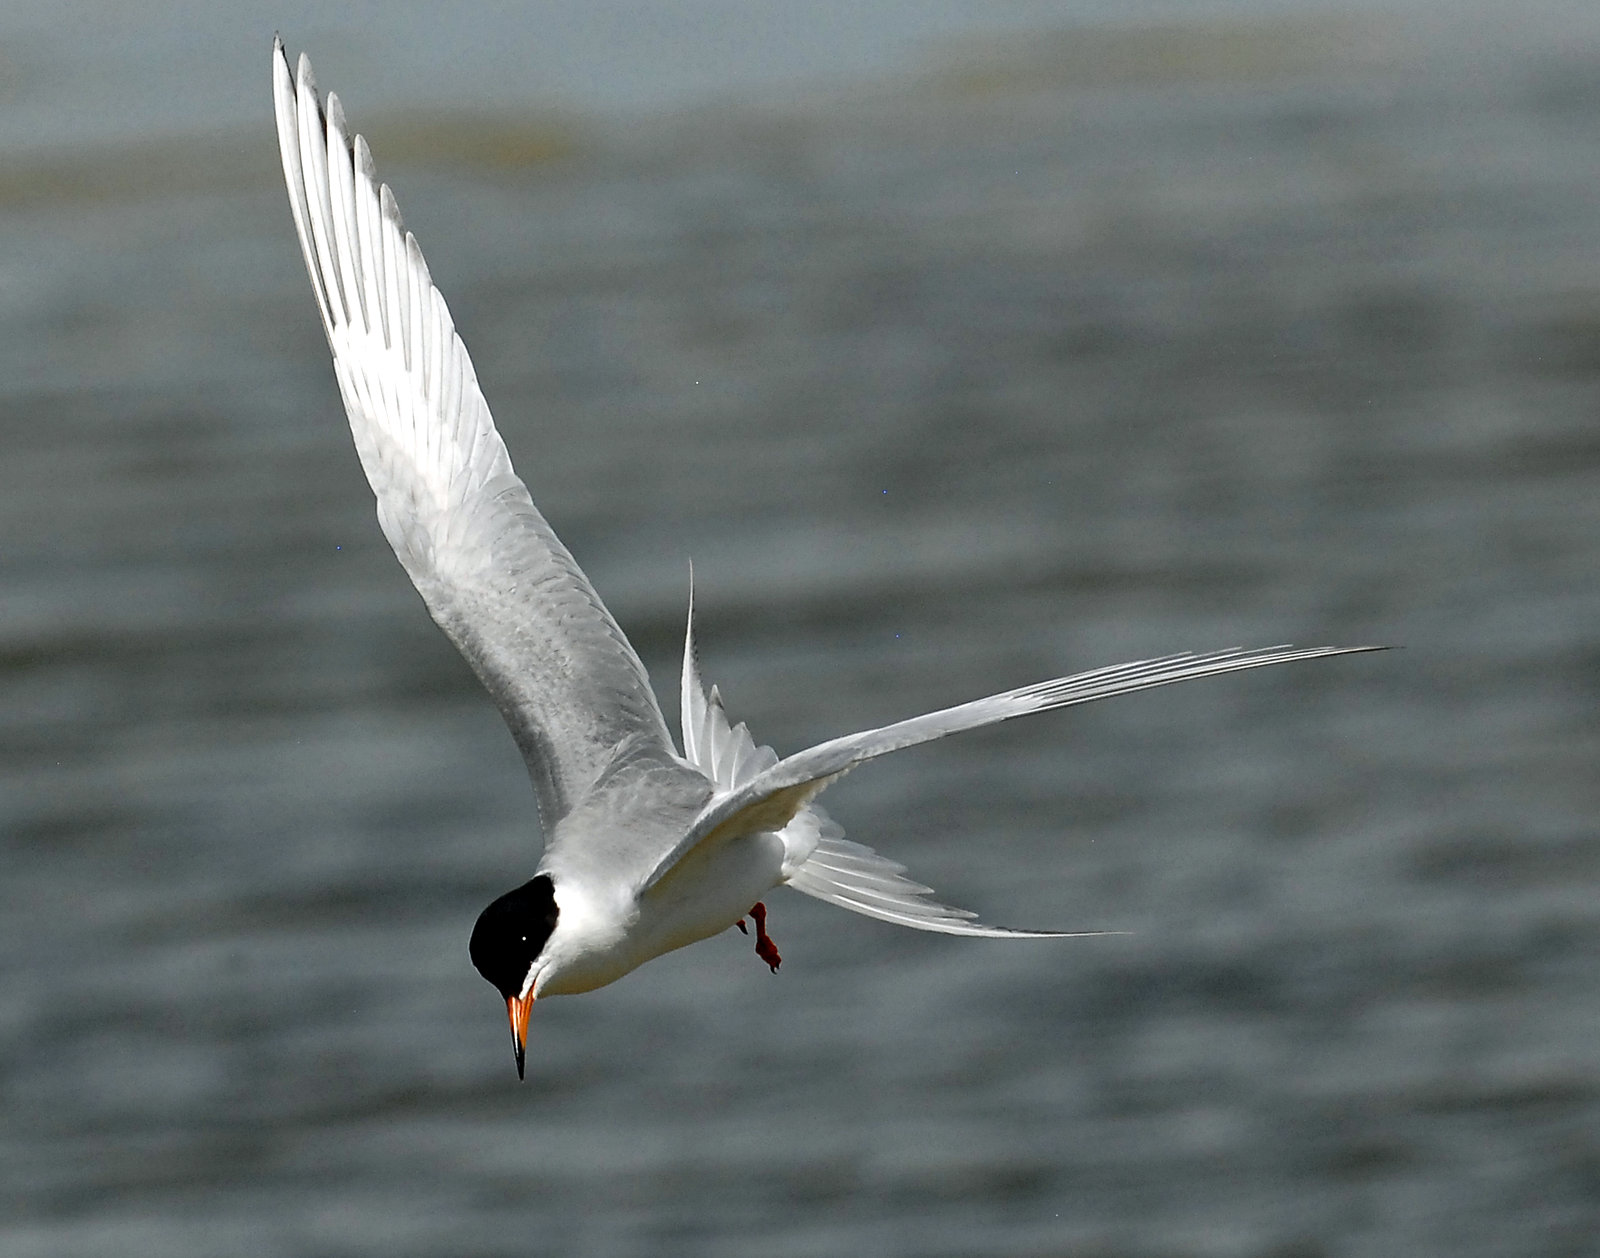 Terns, Forsters